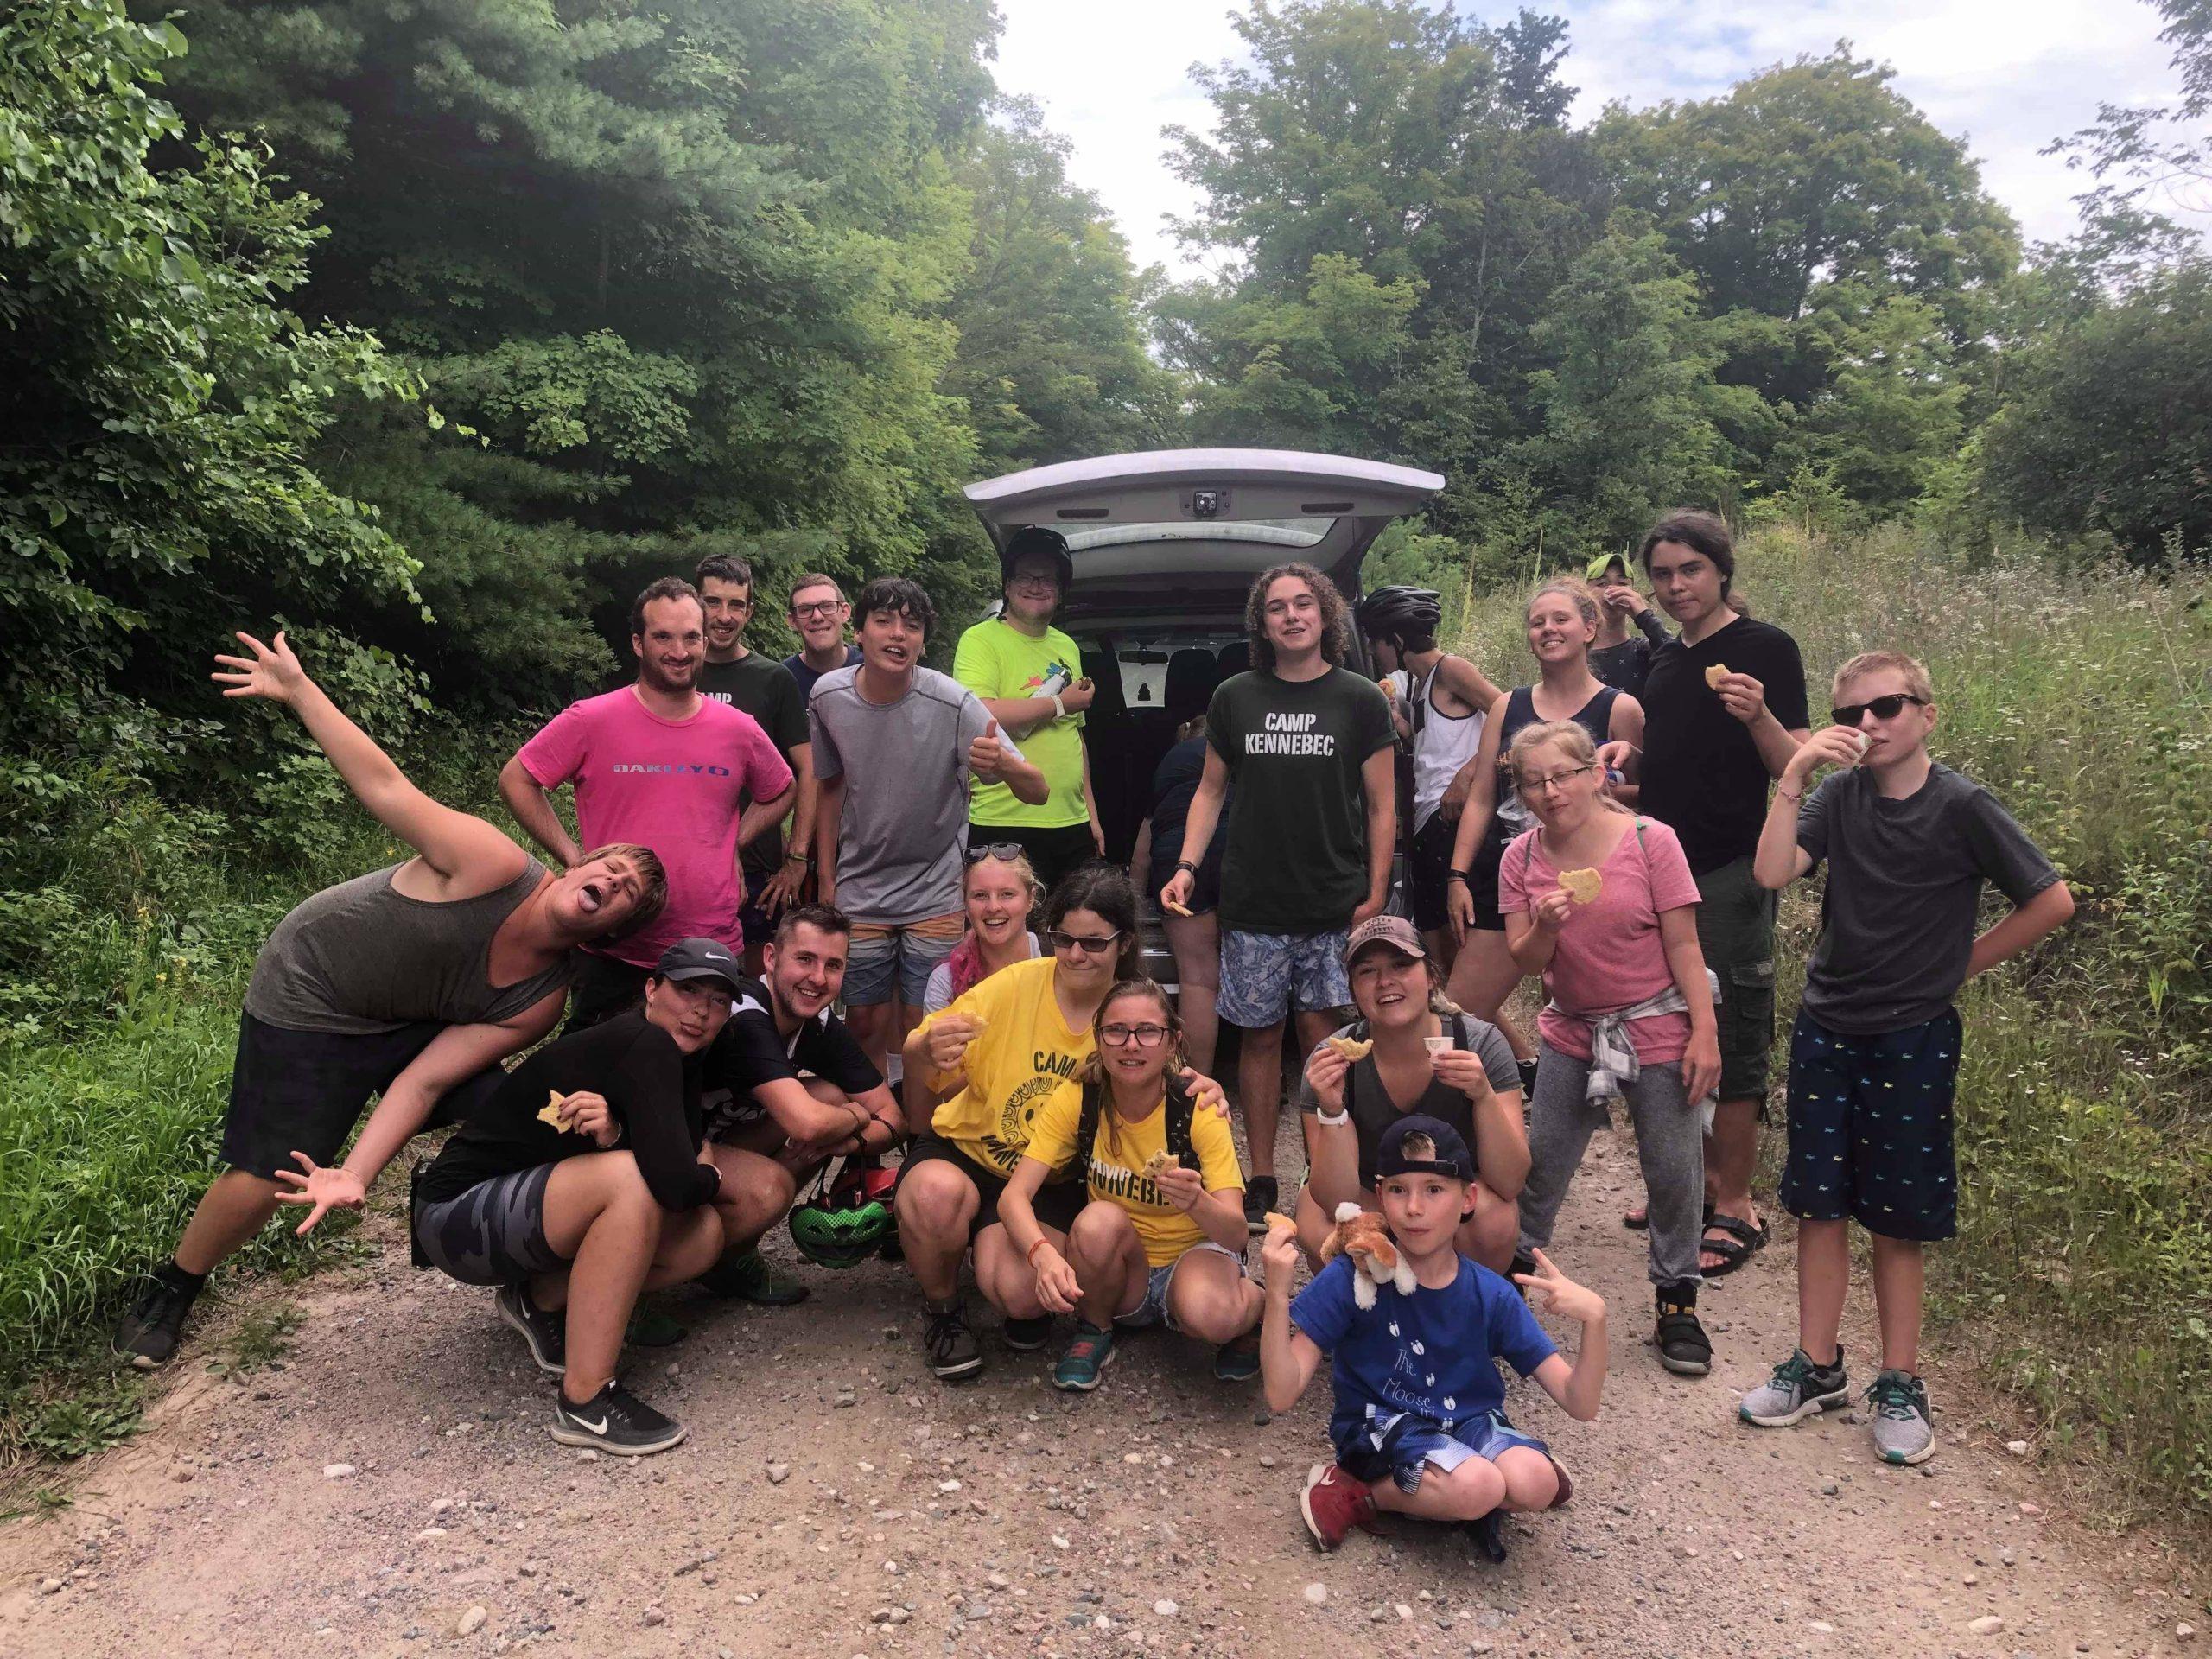 Group of campers heading out on a hike behind a van parked on Camp Kennebec's 4km dirt road drive way